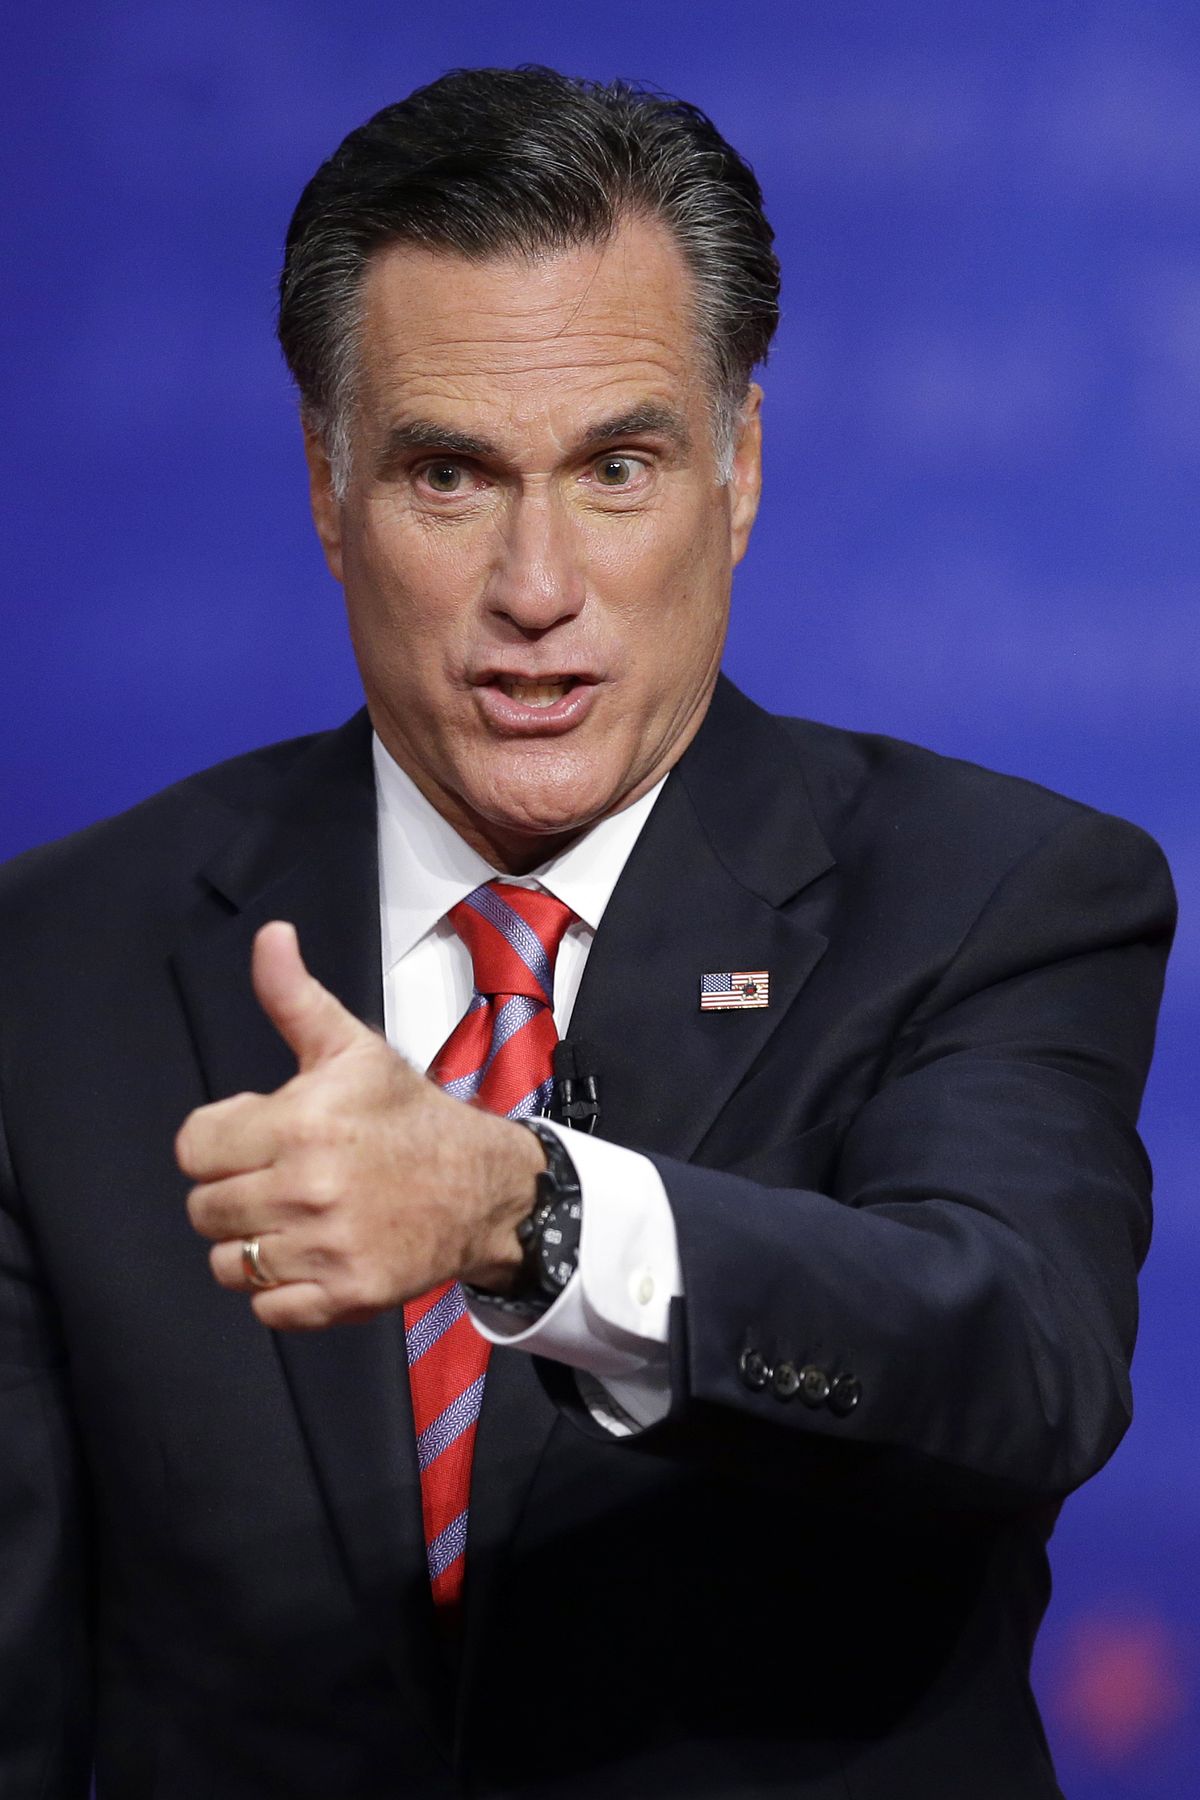 Republican presidential nominee Mitt Romney flashes a thumbs up to the audience after the third presidential debate at Lynn University, Monday, Oct. 22, 2012, in Boca Raton, Fla. (Charlie Neibergall / Associated Press)